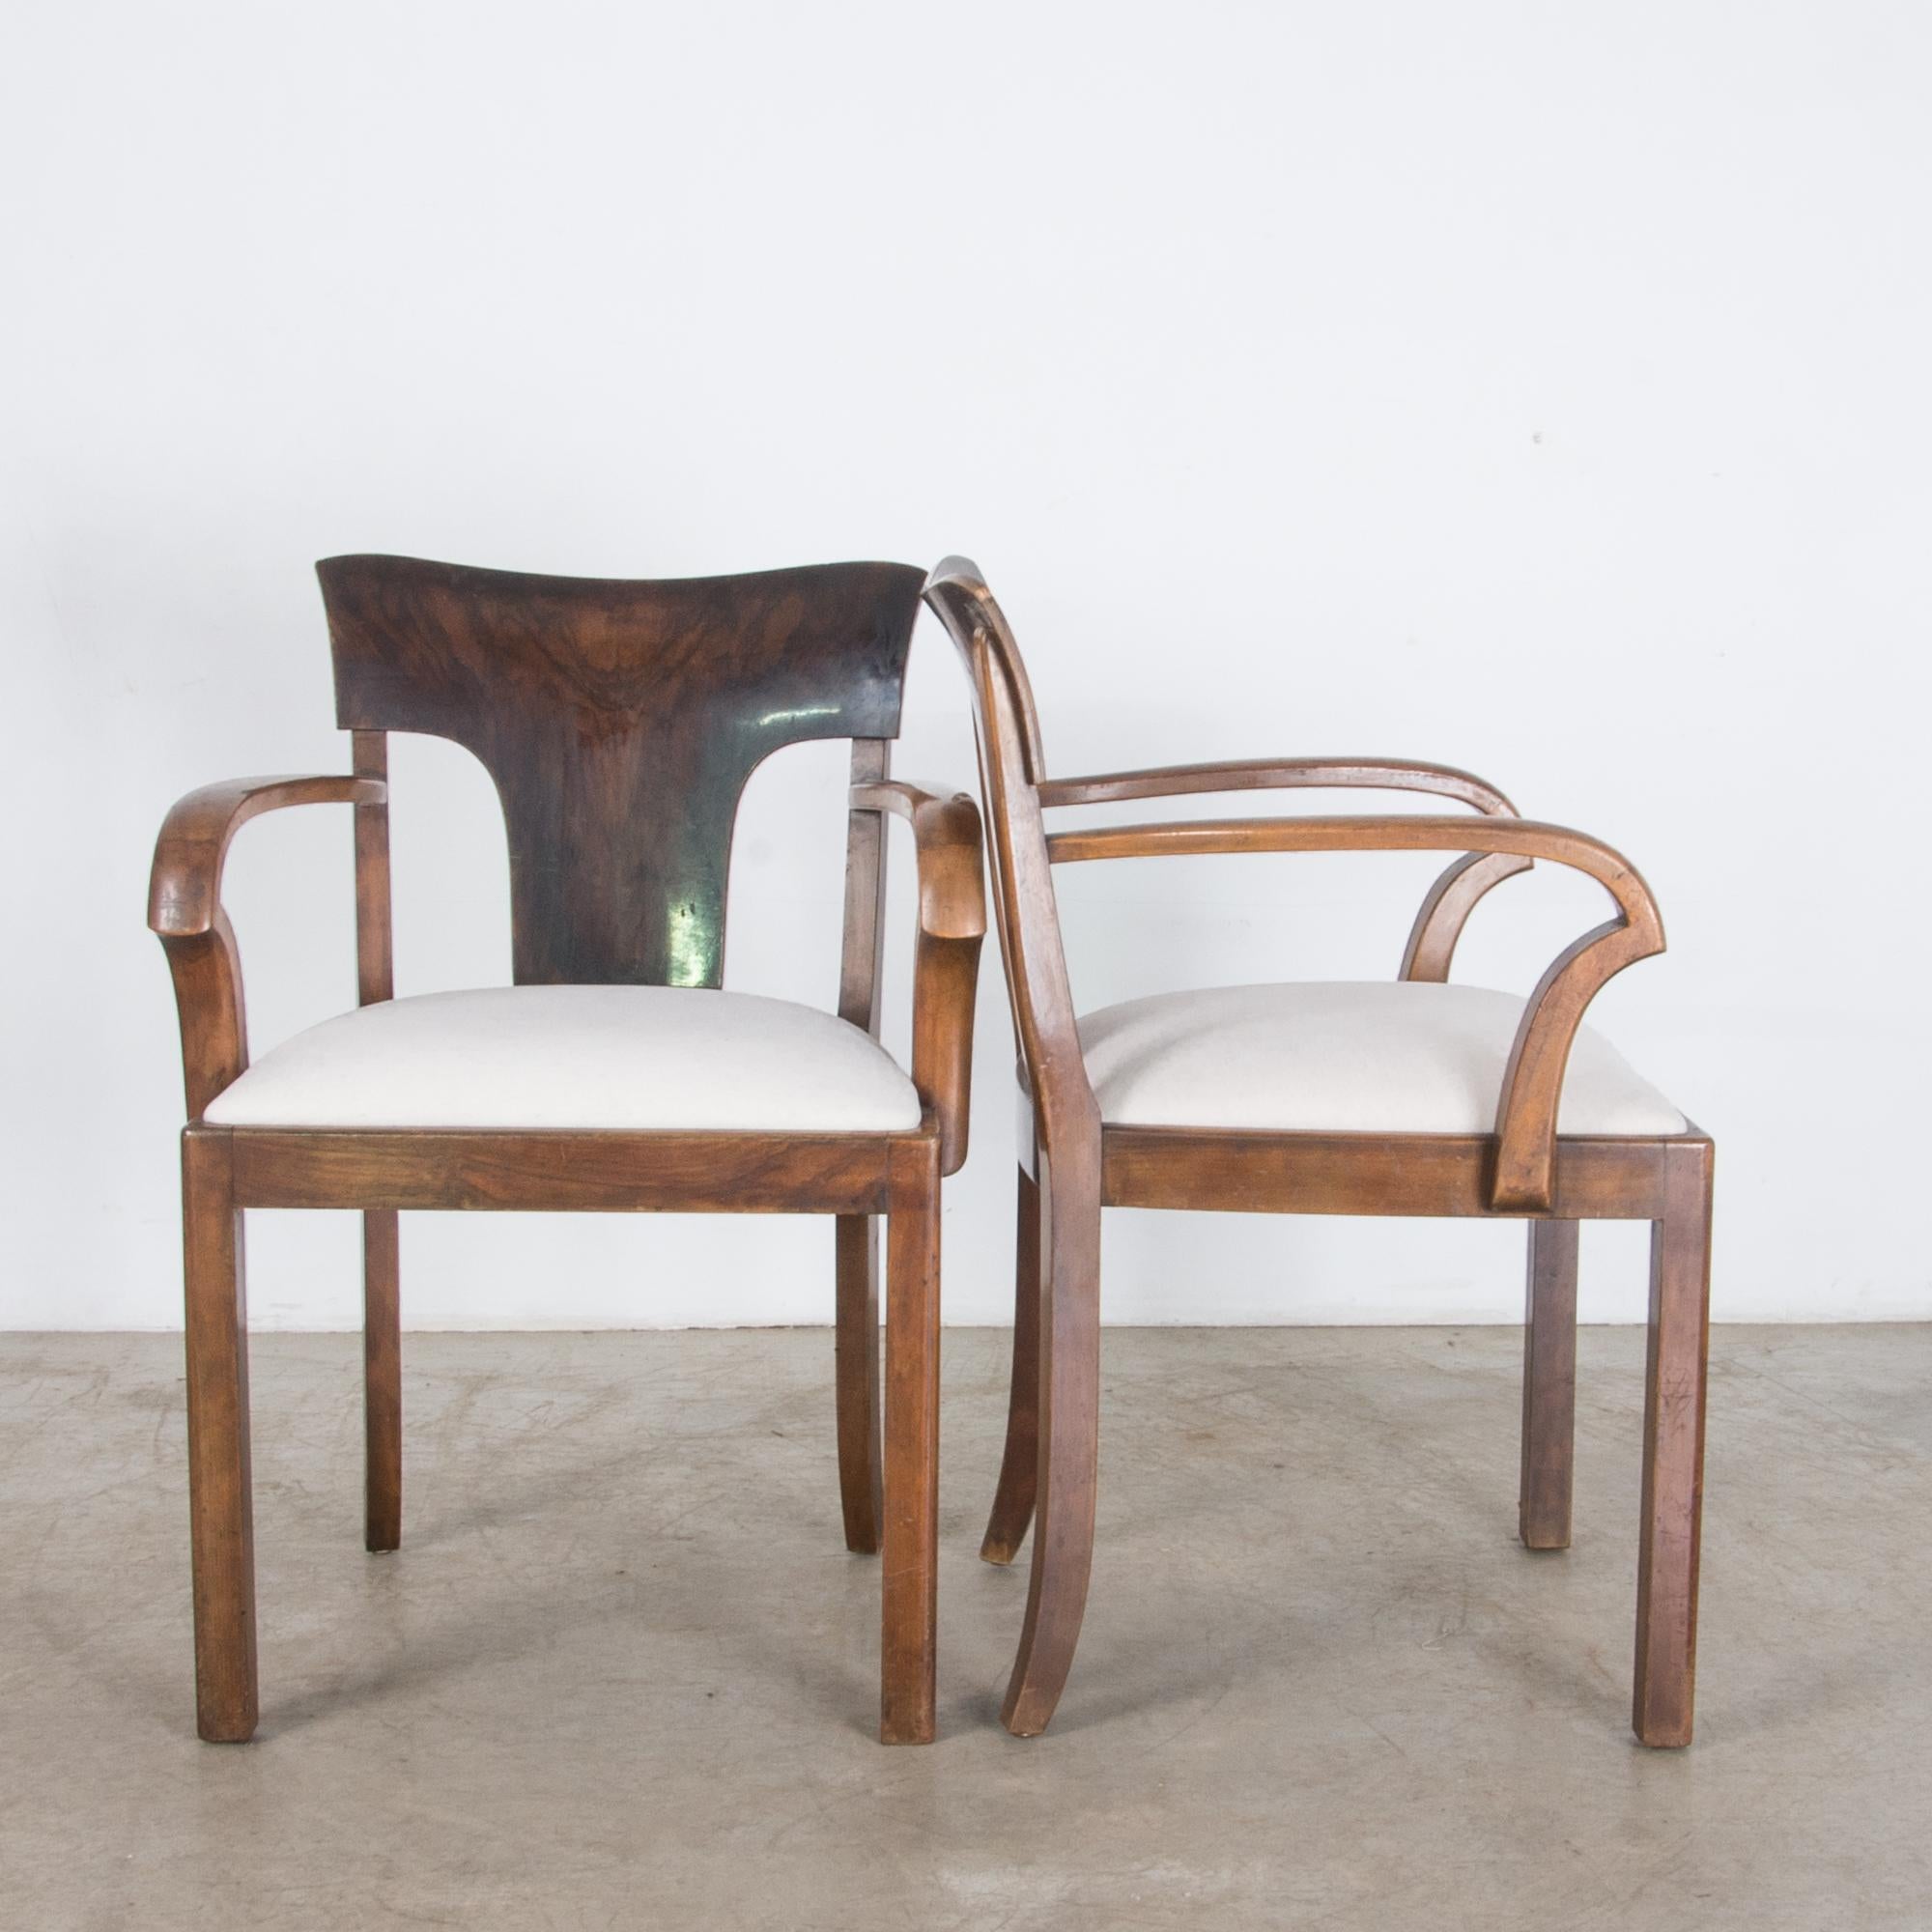 Veneer 1930s French Art Deco Upholstered Armchairs, a Pair